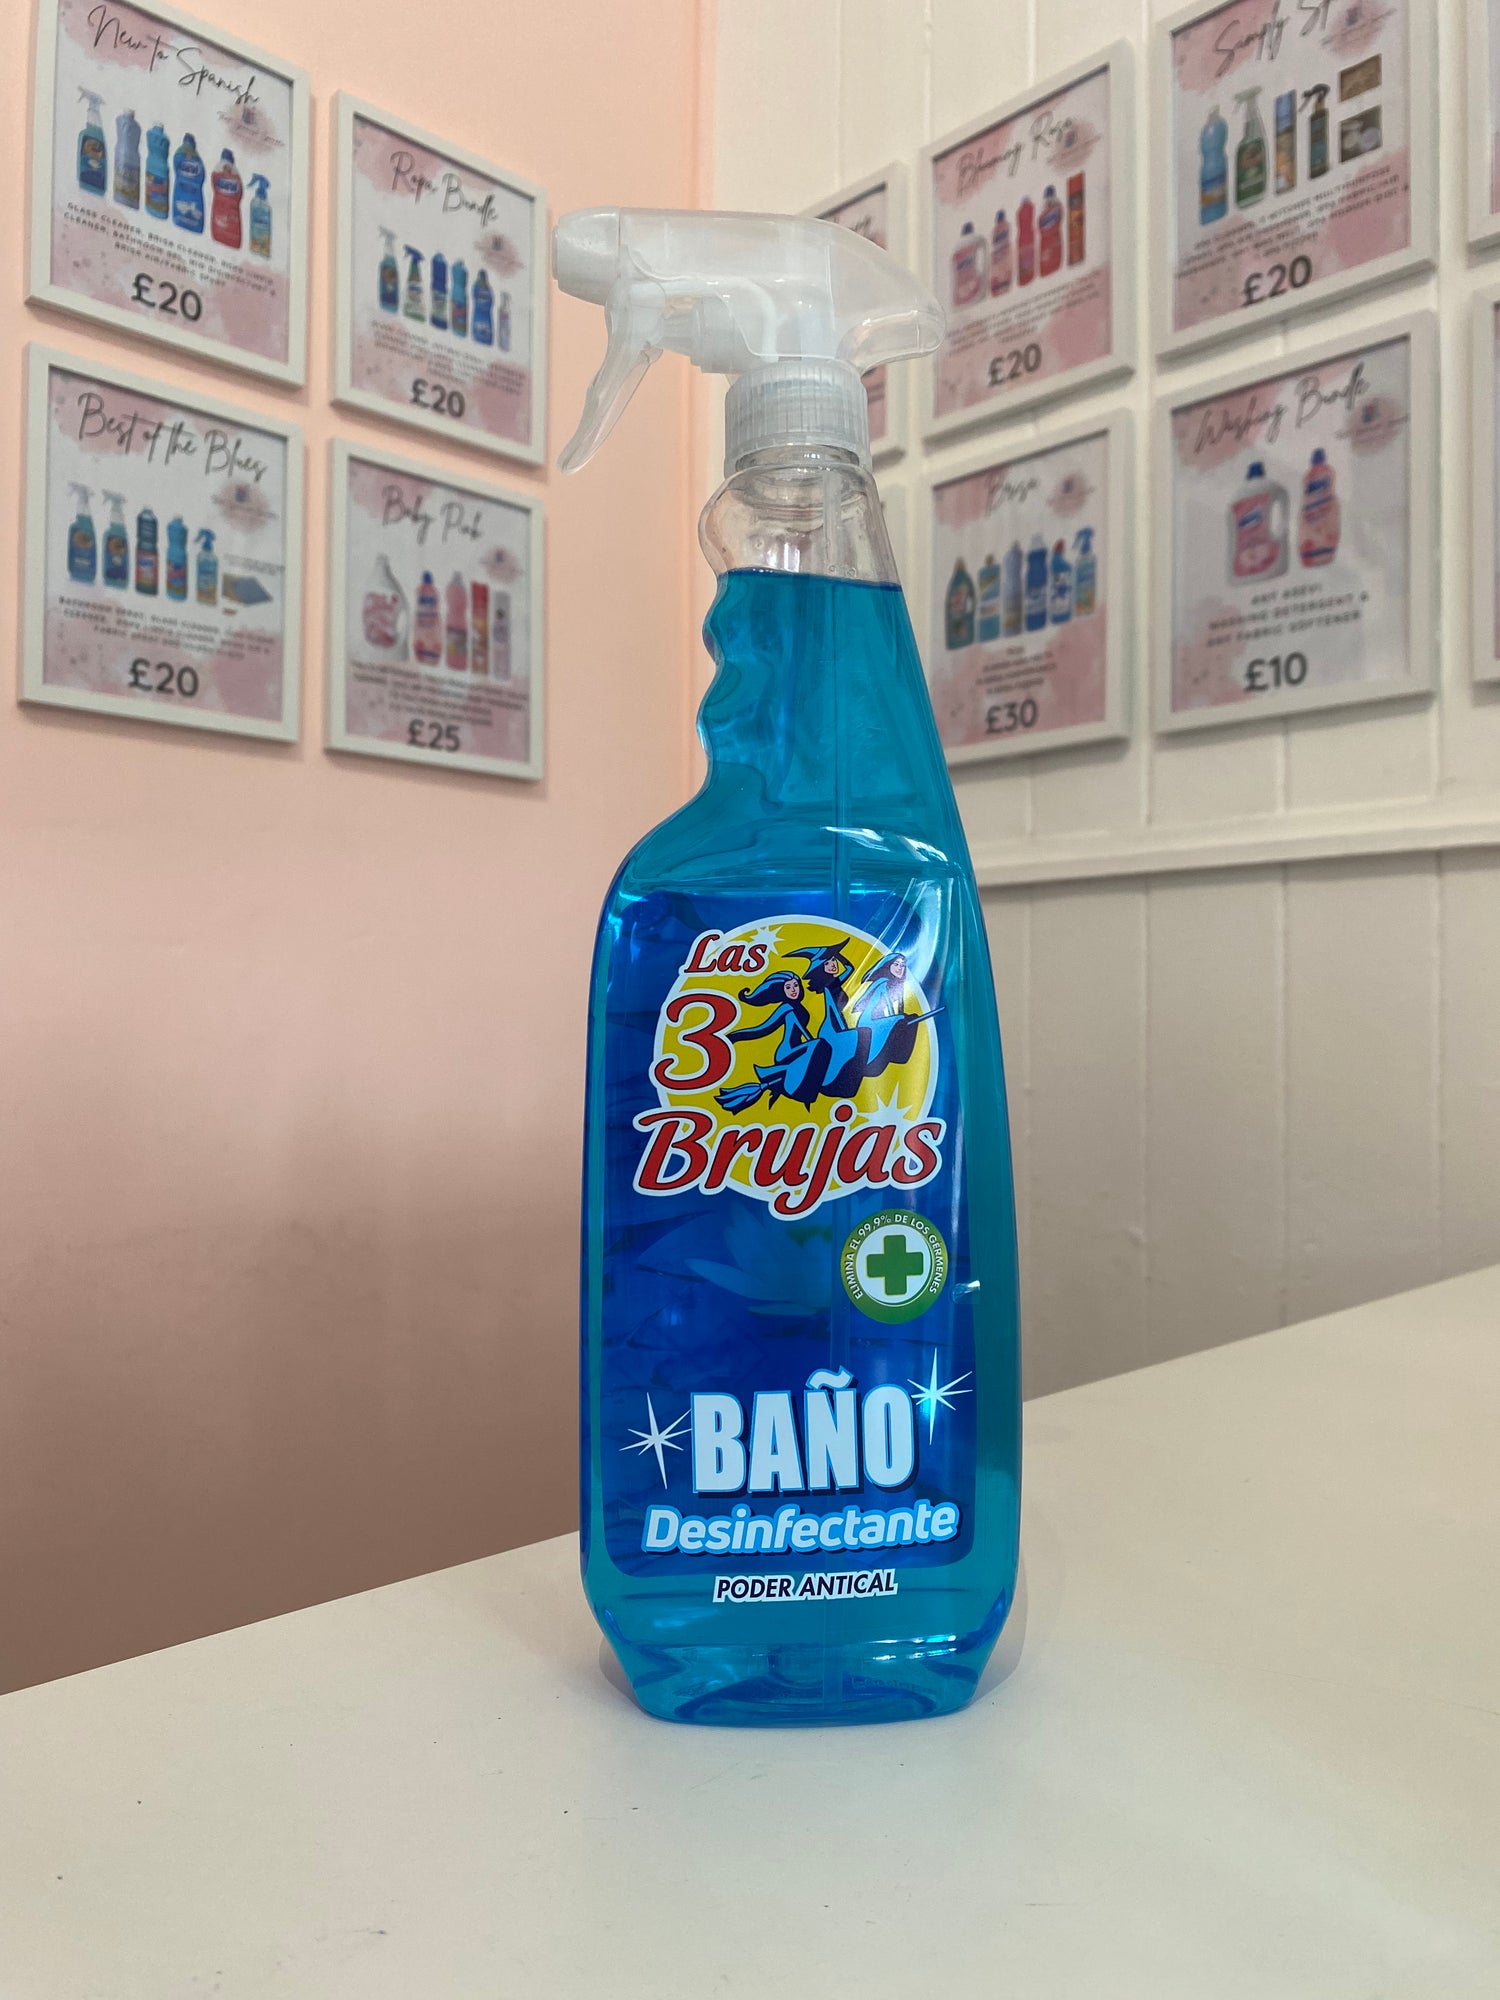 Floor Cleaners – That Spanish Sparkle